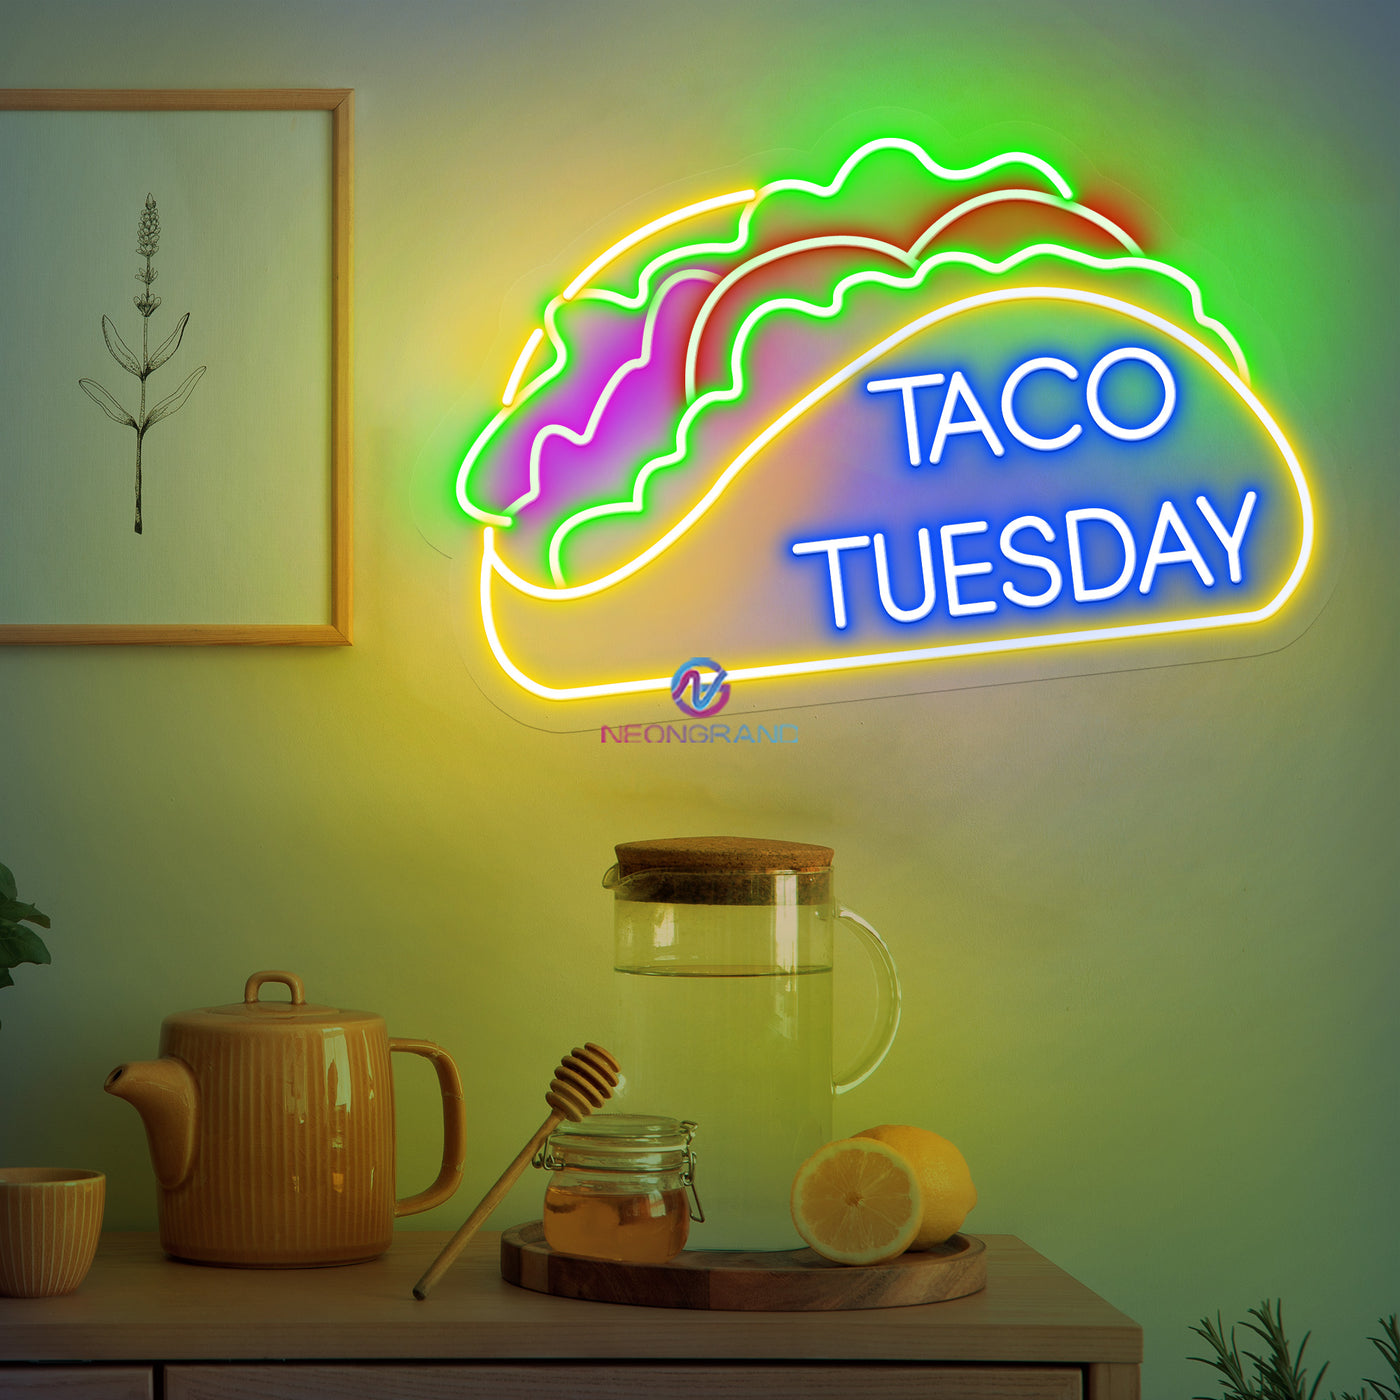 Taco Tuesday Neon Sign Kitchen Led Light